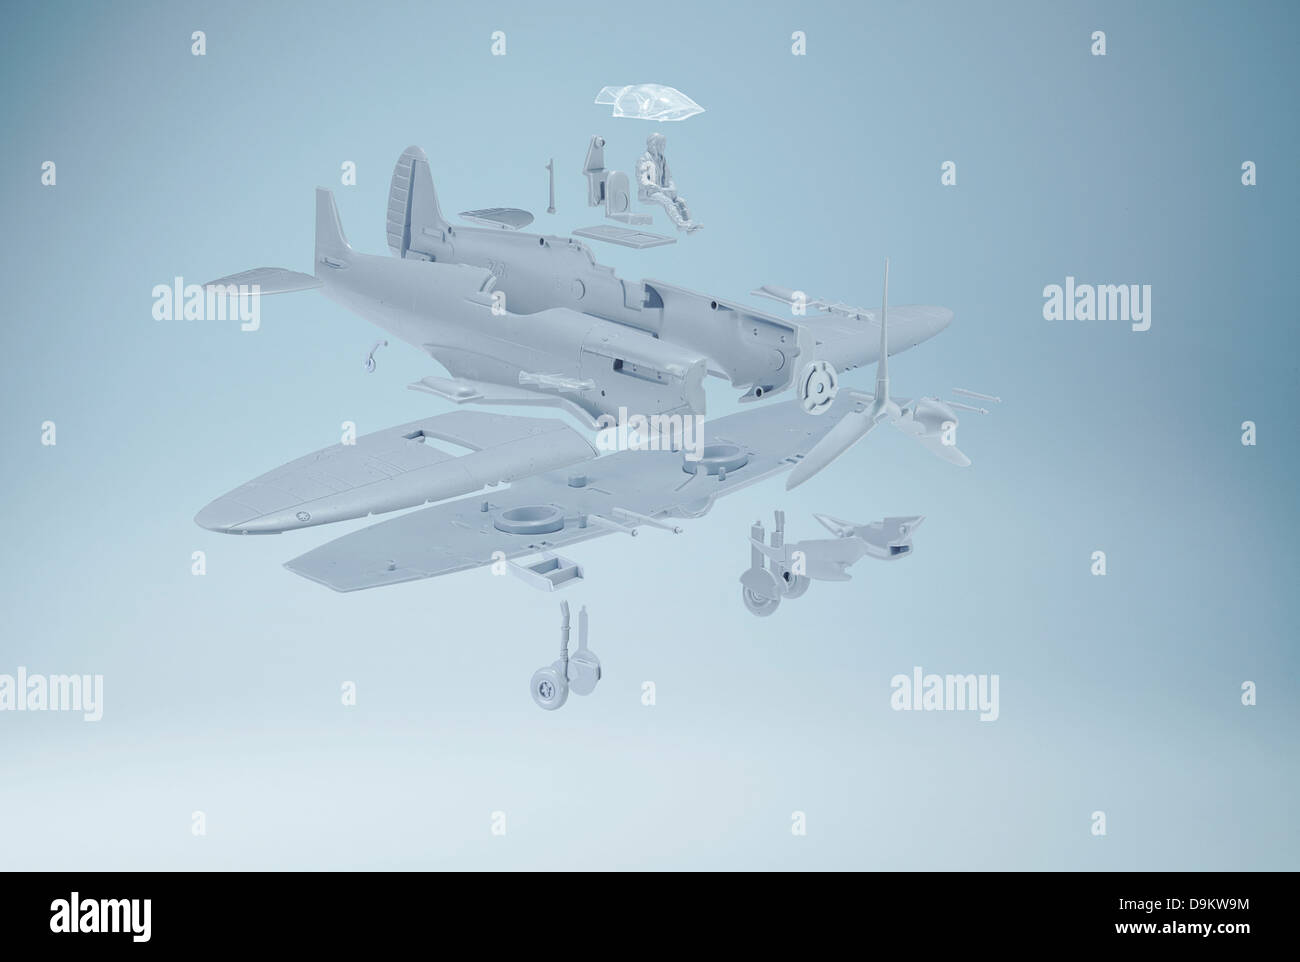 Exploded diagram style photograph of a model Spitfire plane on a blue background Stock Photo